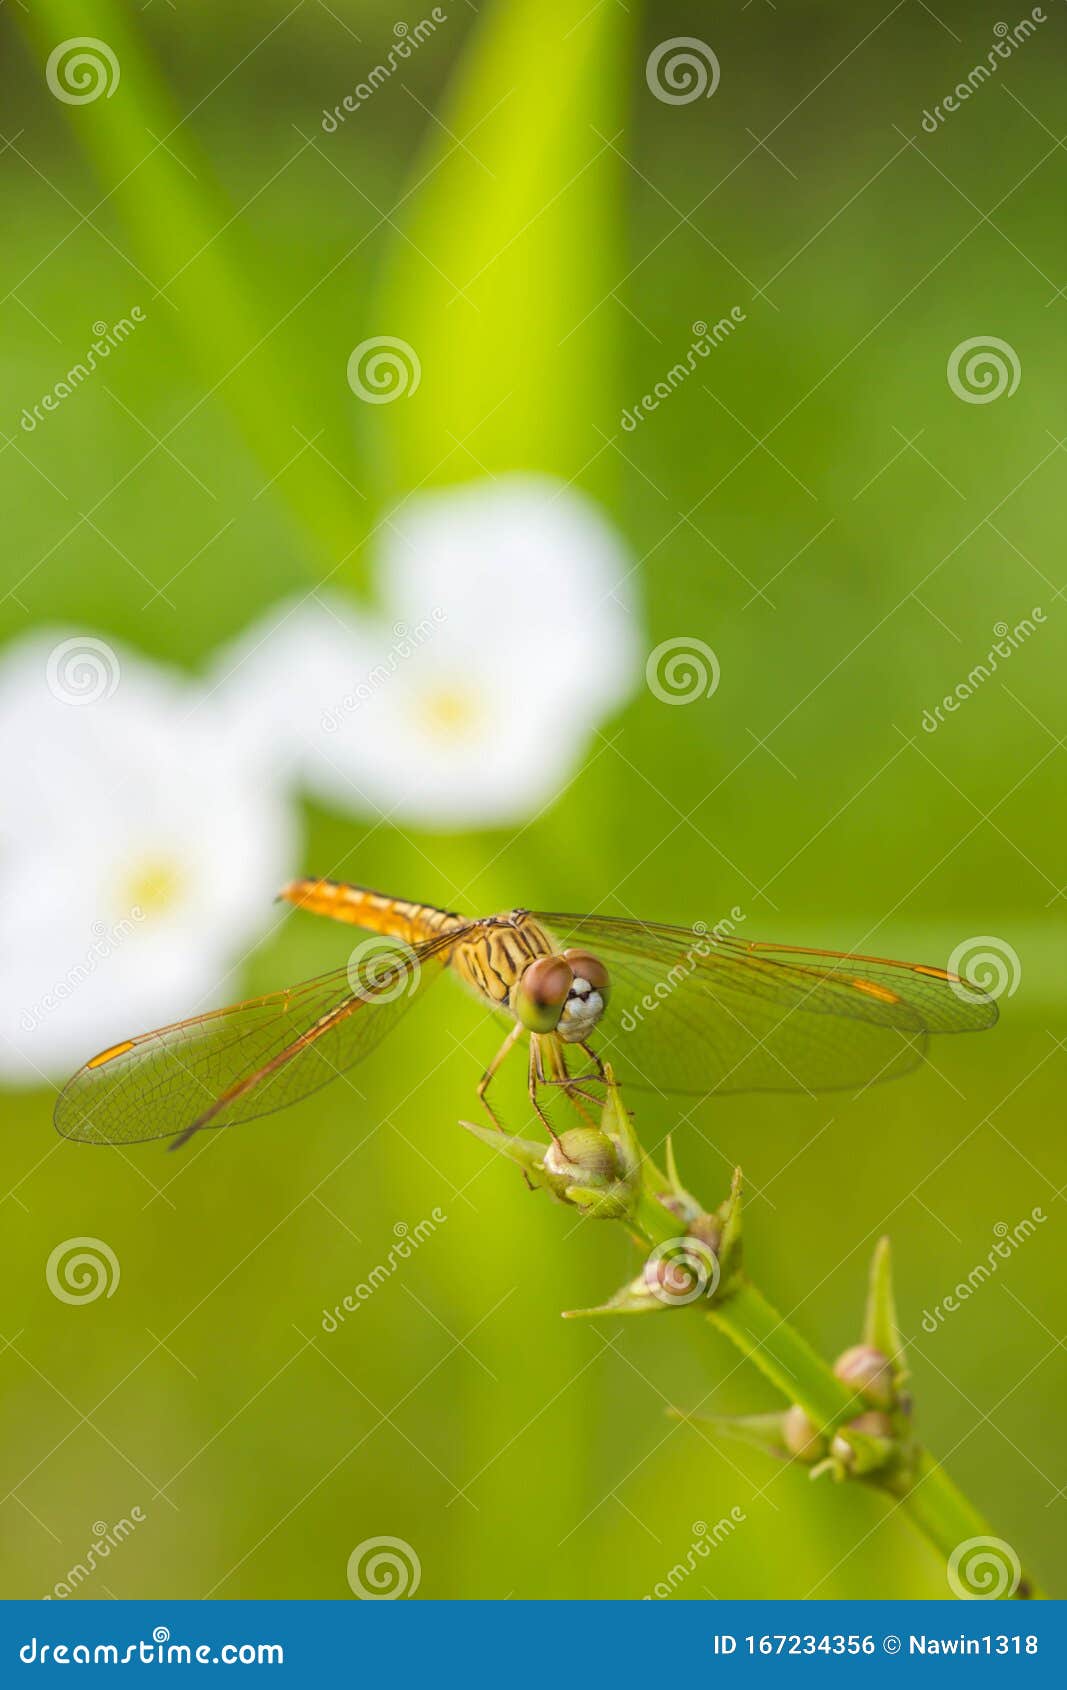 dragonfly, dragonflies of thailand  agriocnemis minima , dragonfly rest on green grass leaf